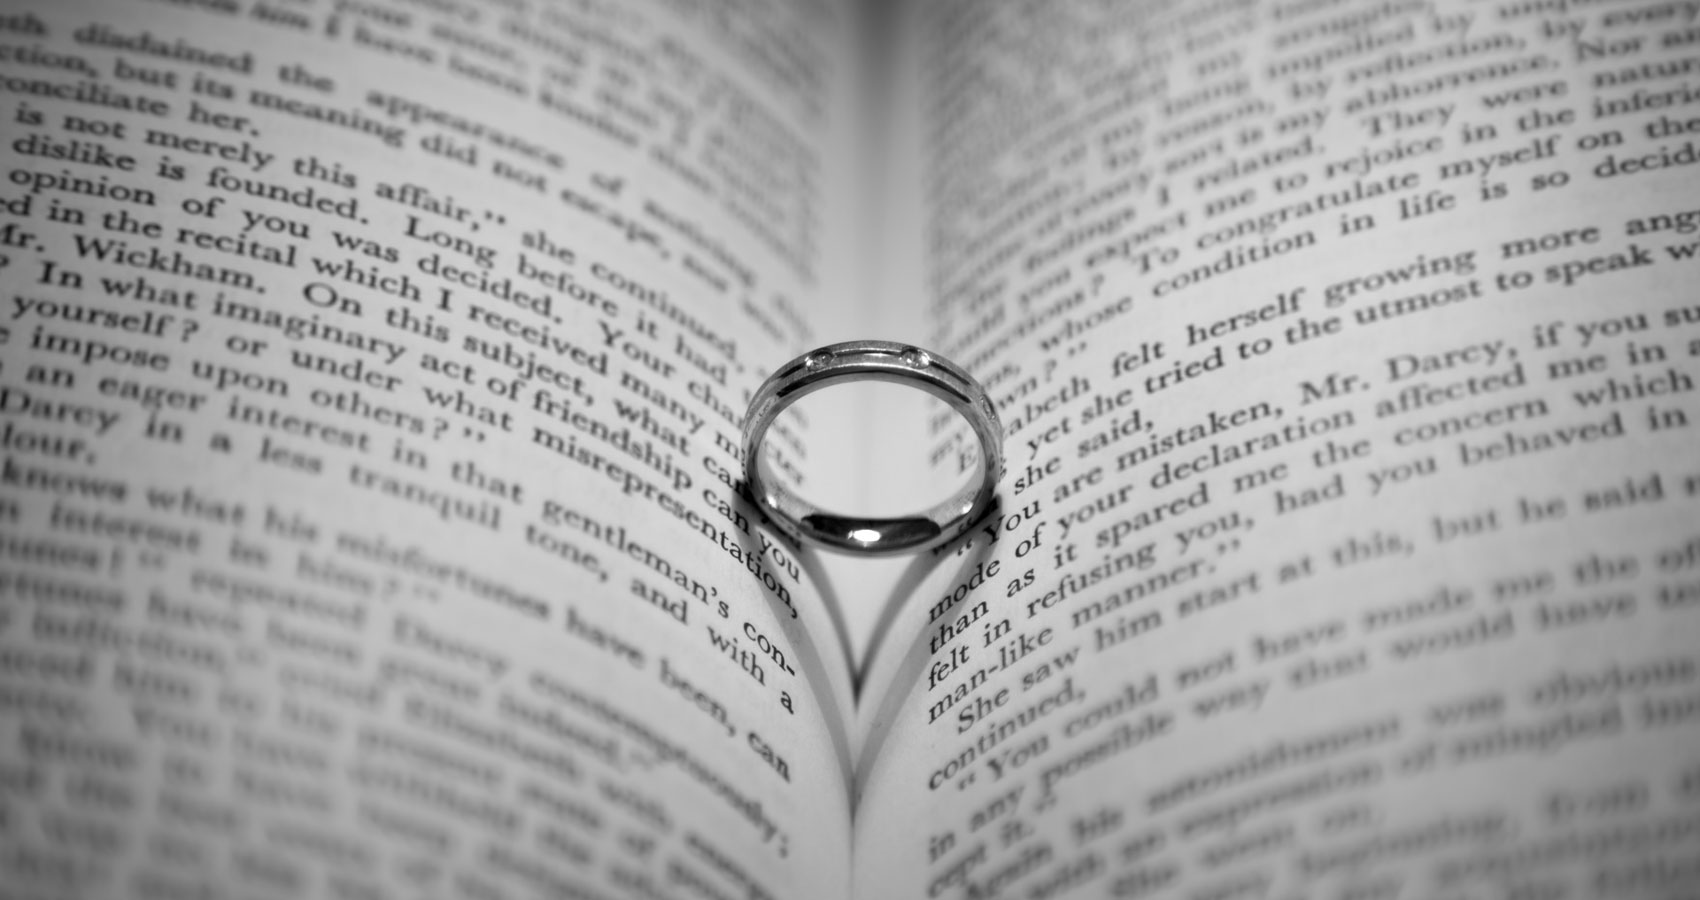 We have our own vows by Christina Strigas at Spillwords.com